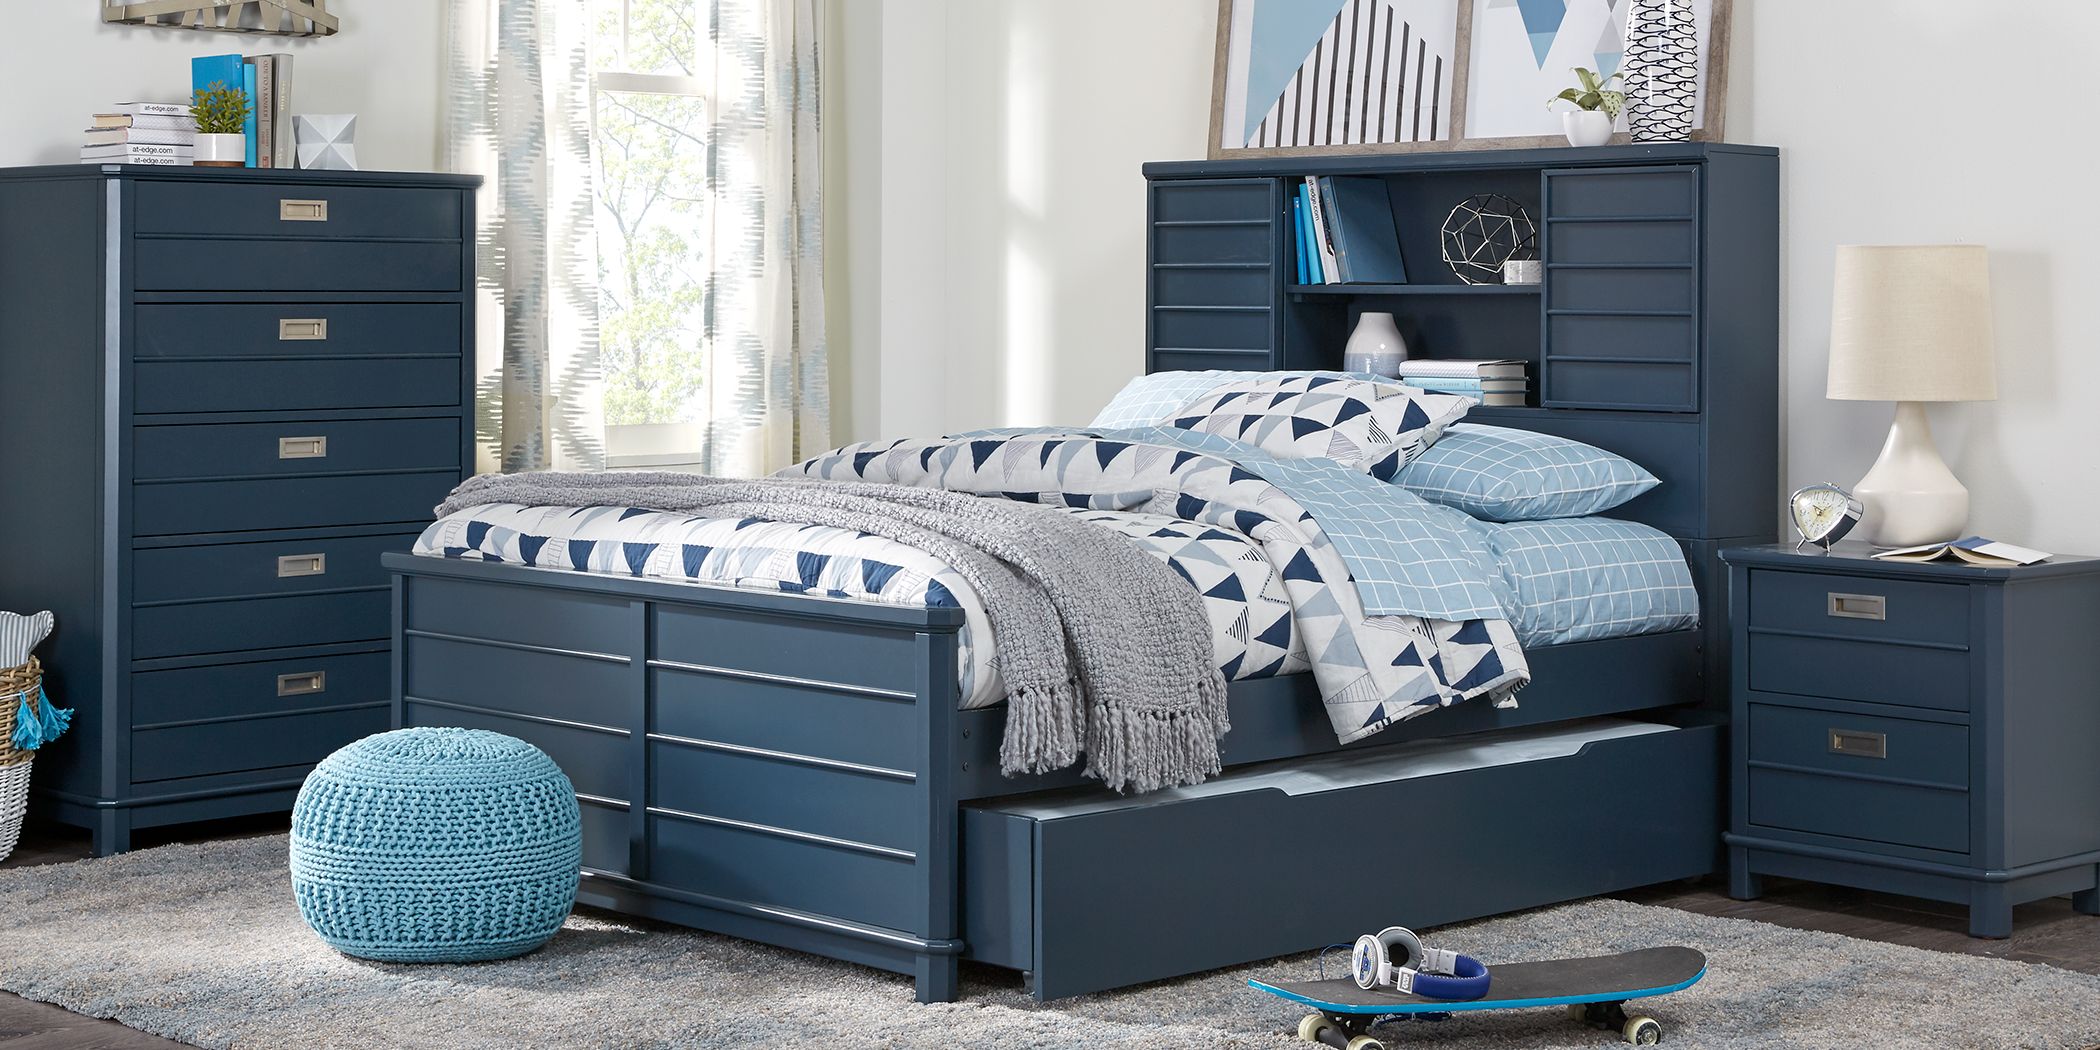 Girls Bedroom Sets, Twin Bed And Dresser Combo